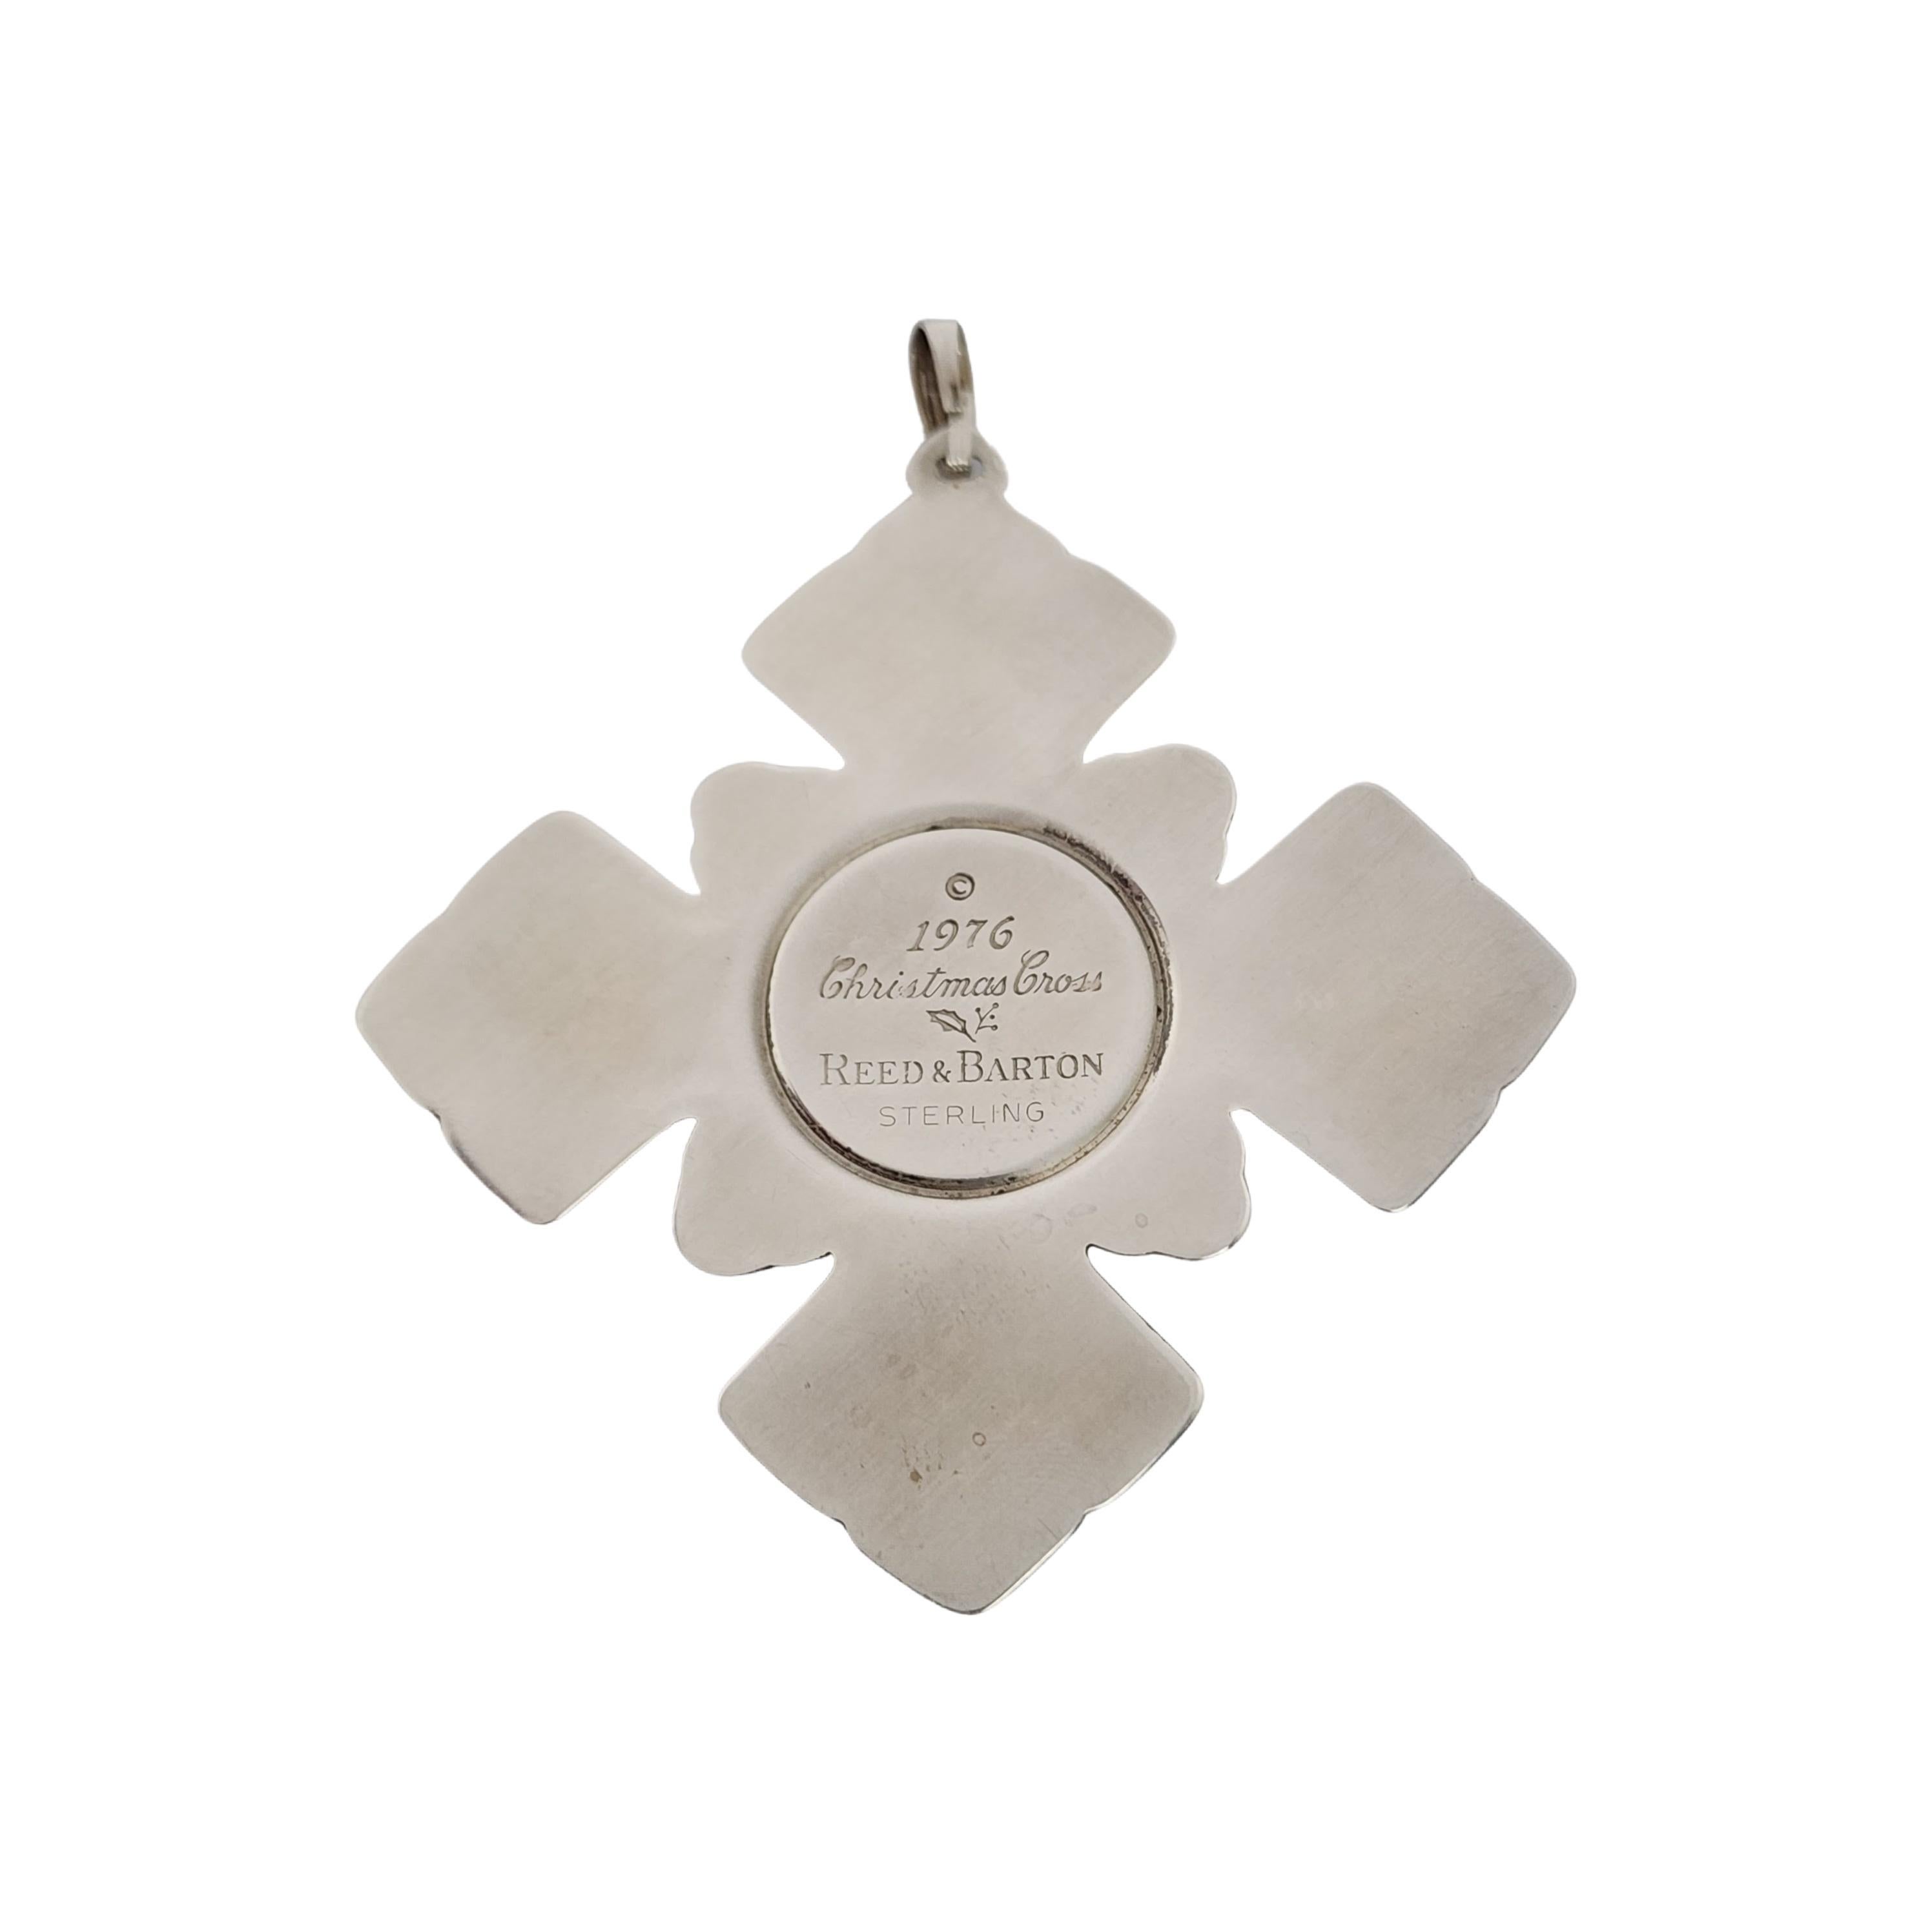 Reed & Barton sterling silver Christmas Cross ornament from 1976.

Since 1970, Reed & Barton has been celebrating the season with a yearly version of the Christmas Cross, creating a beautiful tradition of sparkling art.

Measures approx 3 1/4